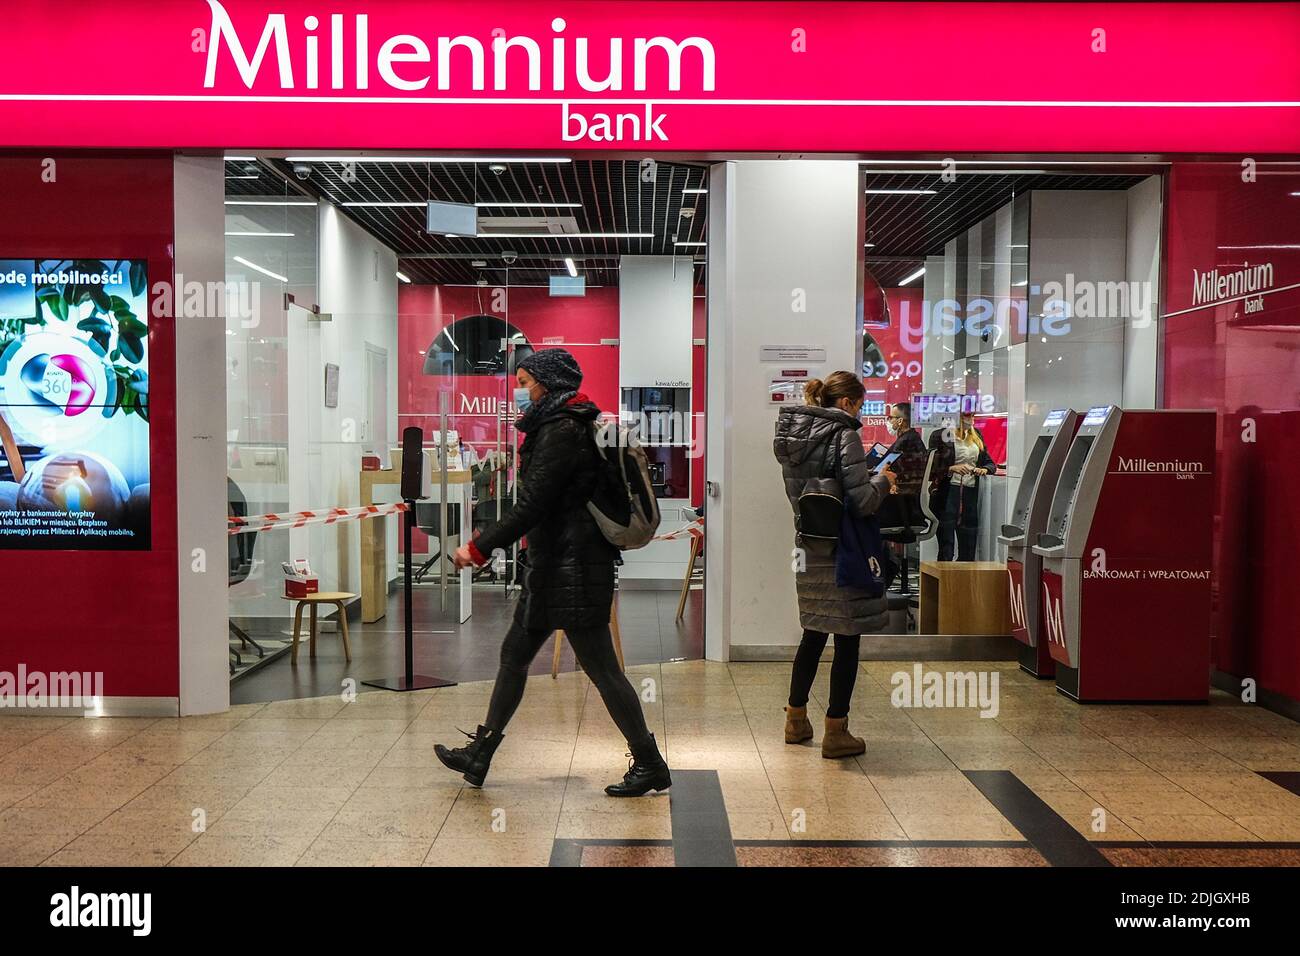 Millennium Measure High Resolution Stock Photography and Images - Alamy